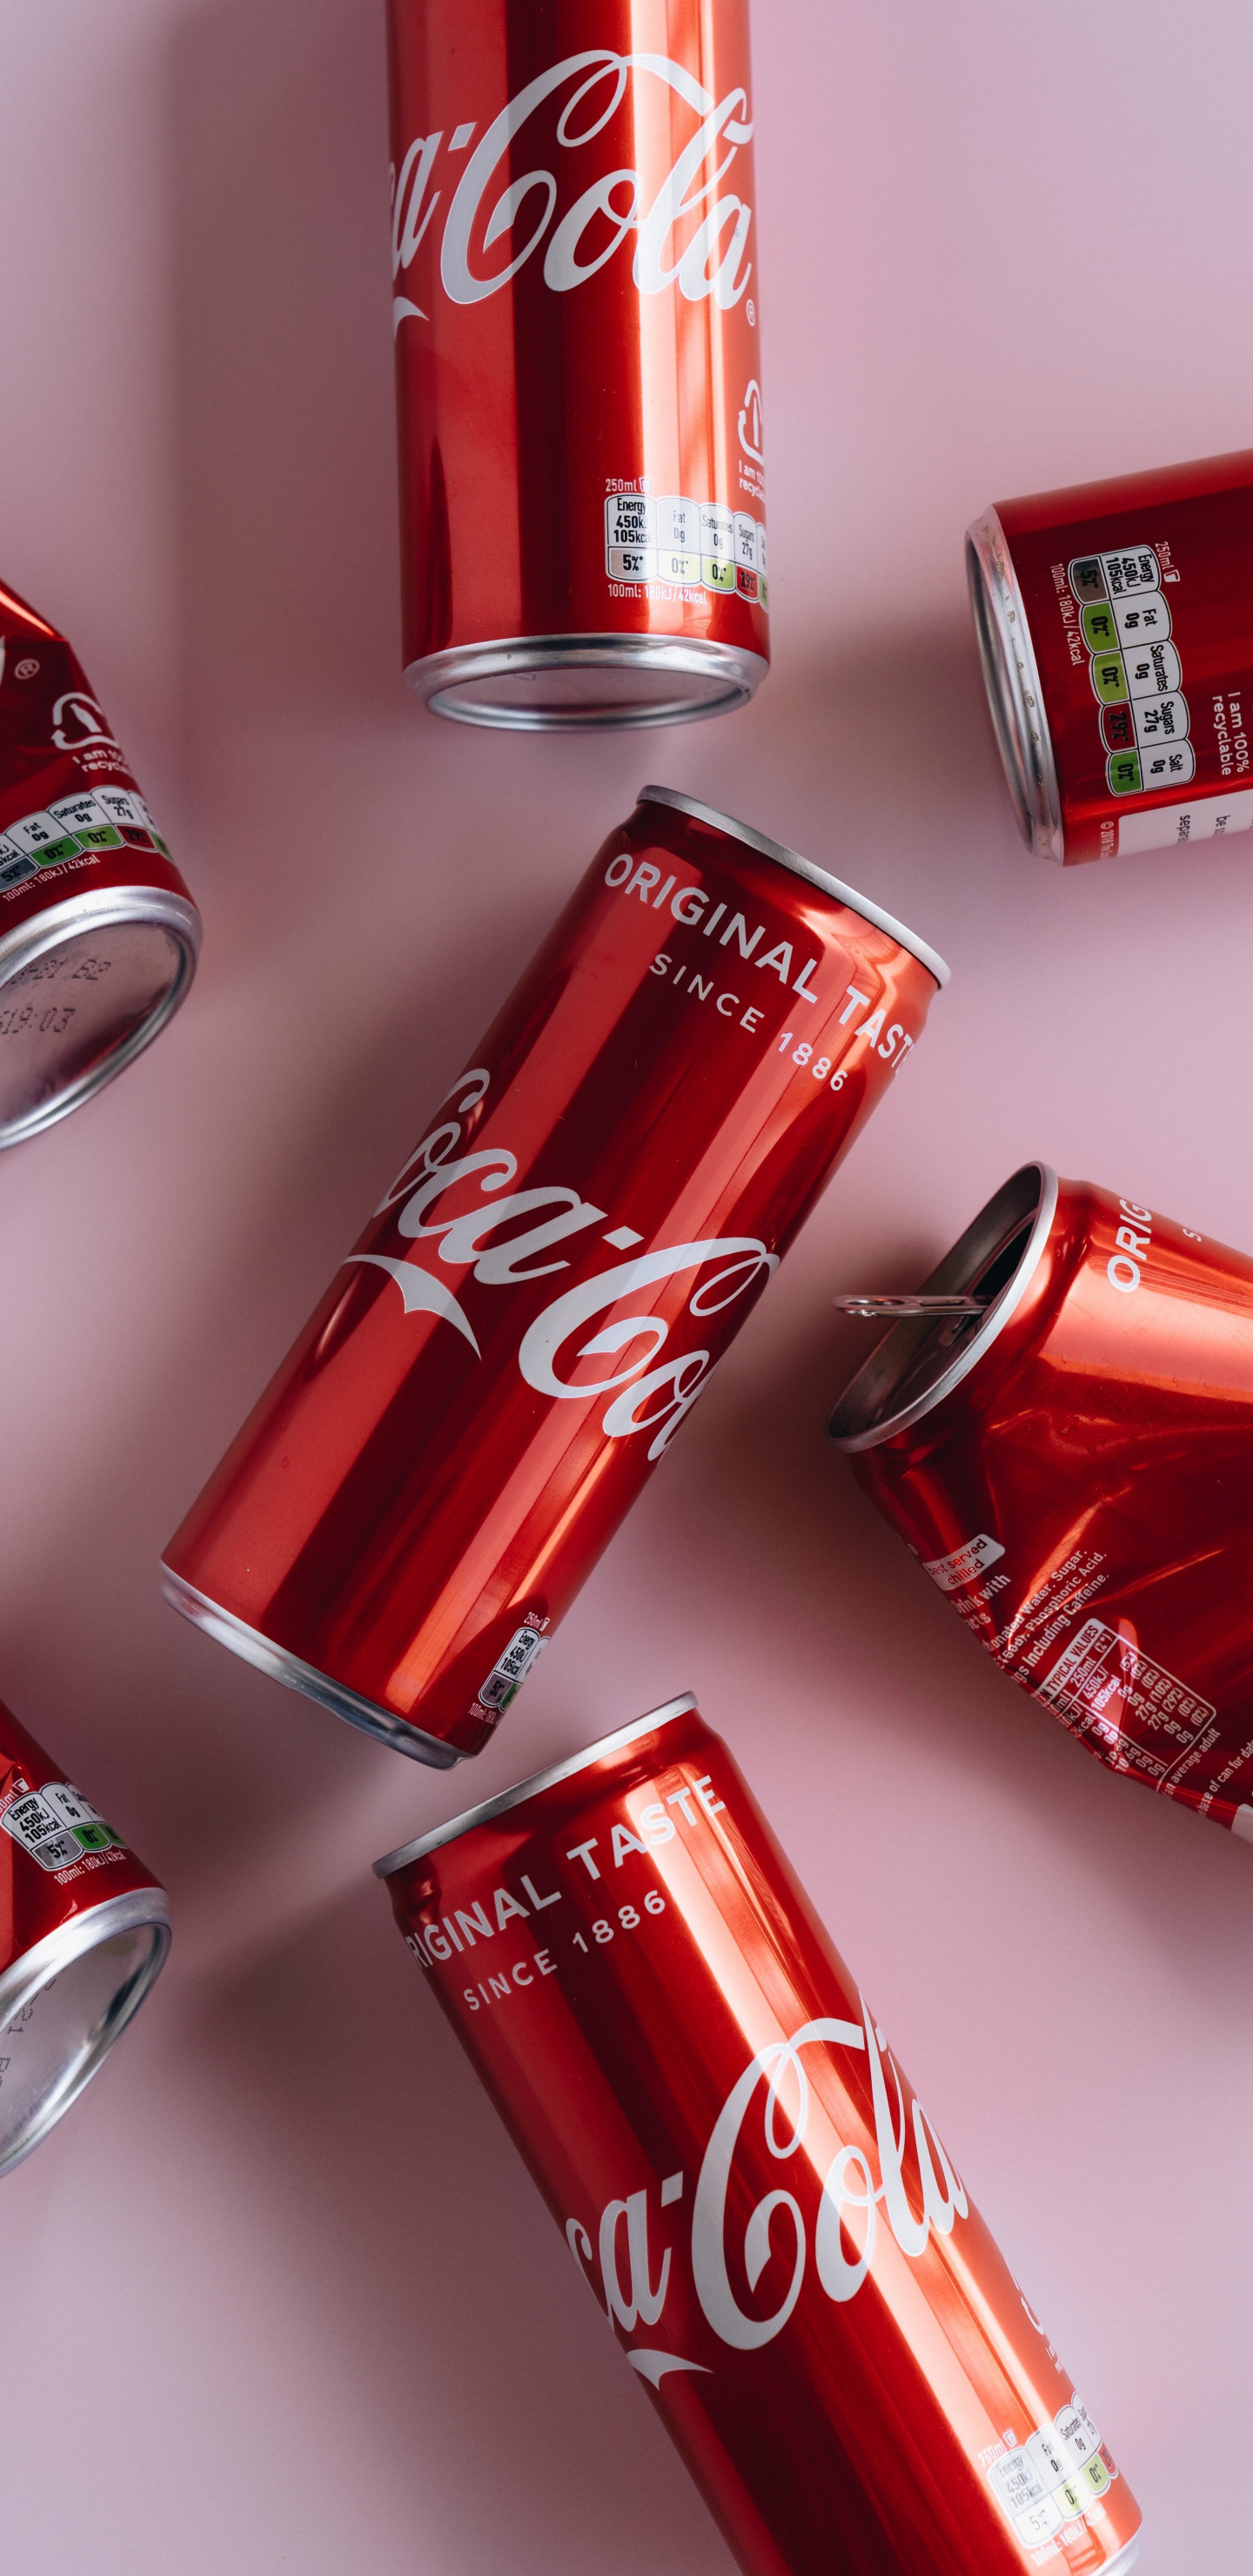 Soft-drink, coca cola, drink can, 1440x2960 wallpaper